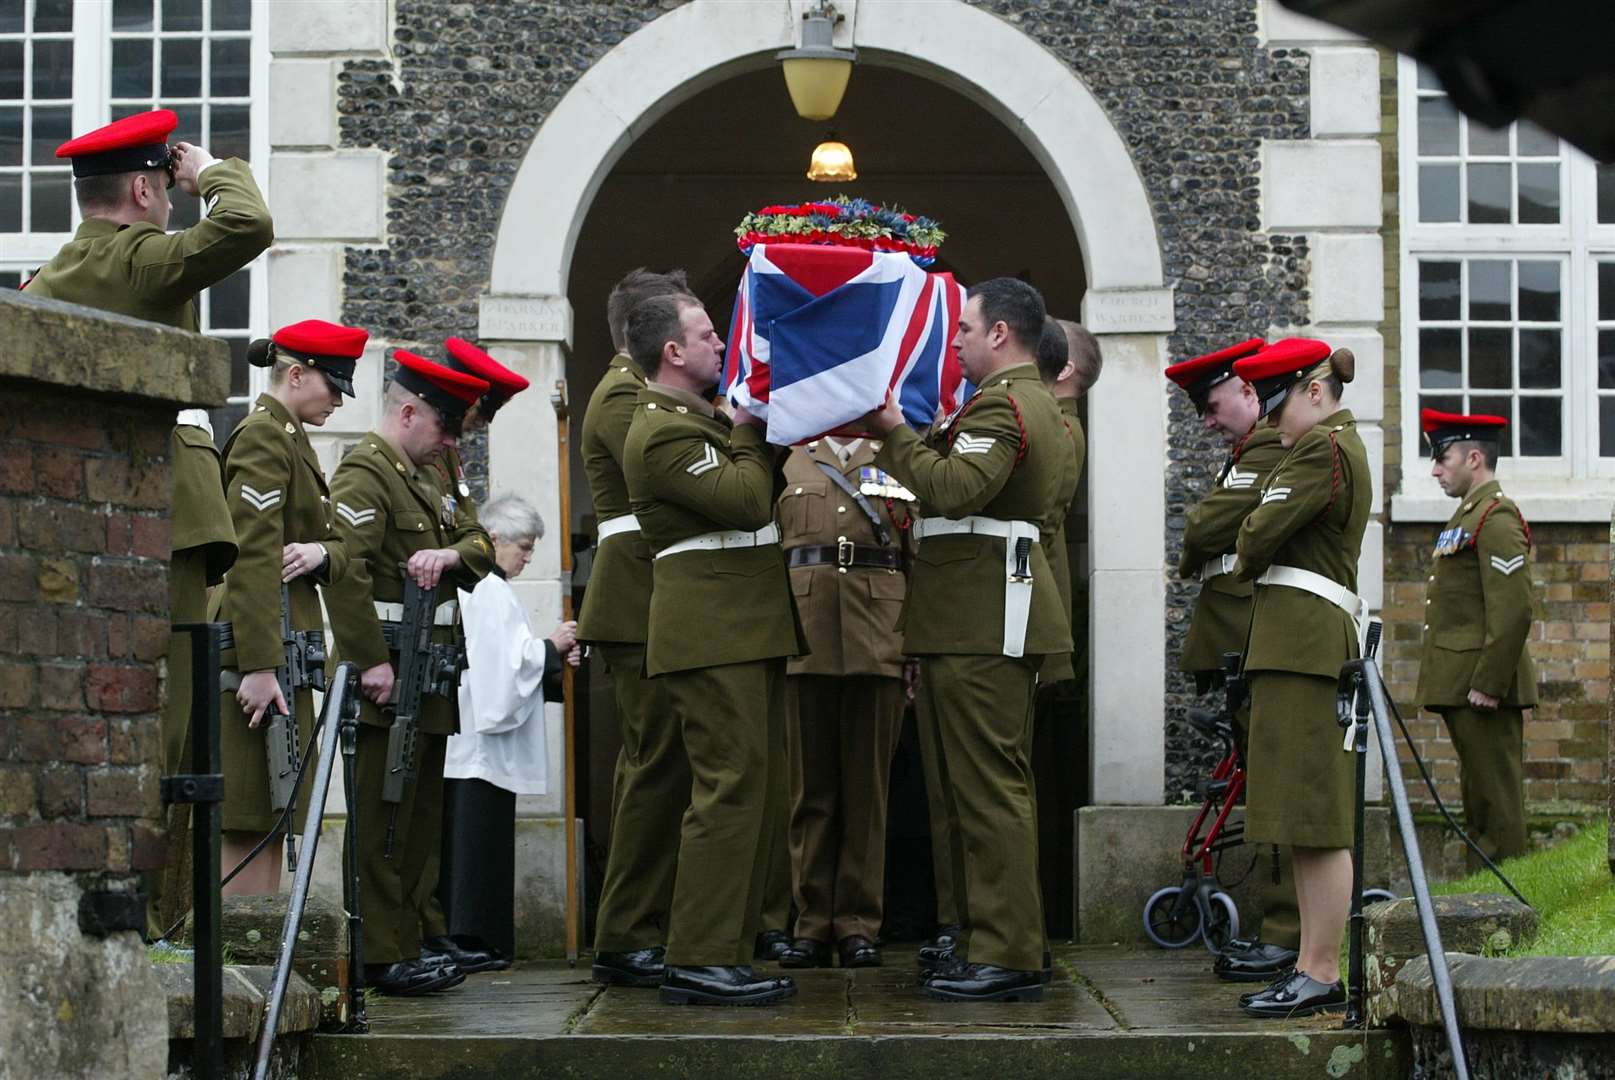 Sgt Robert Loughran-Dickson was given full military honours